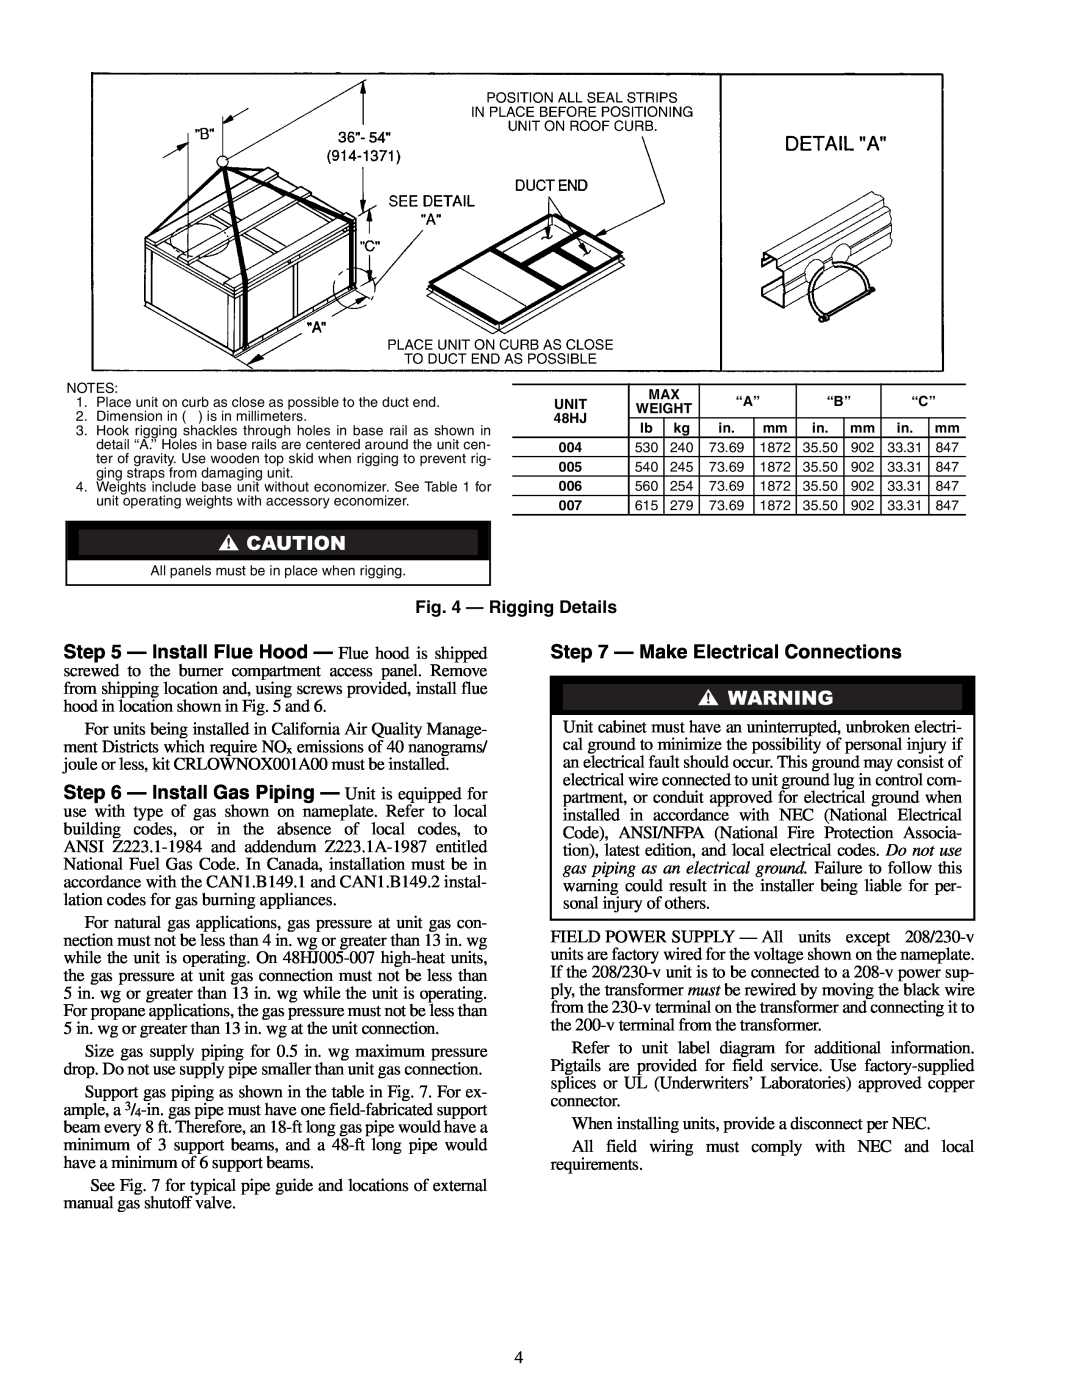 Carrier 48HJD005-007 specifications Make Electrical Connections 